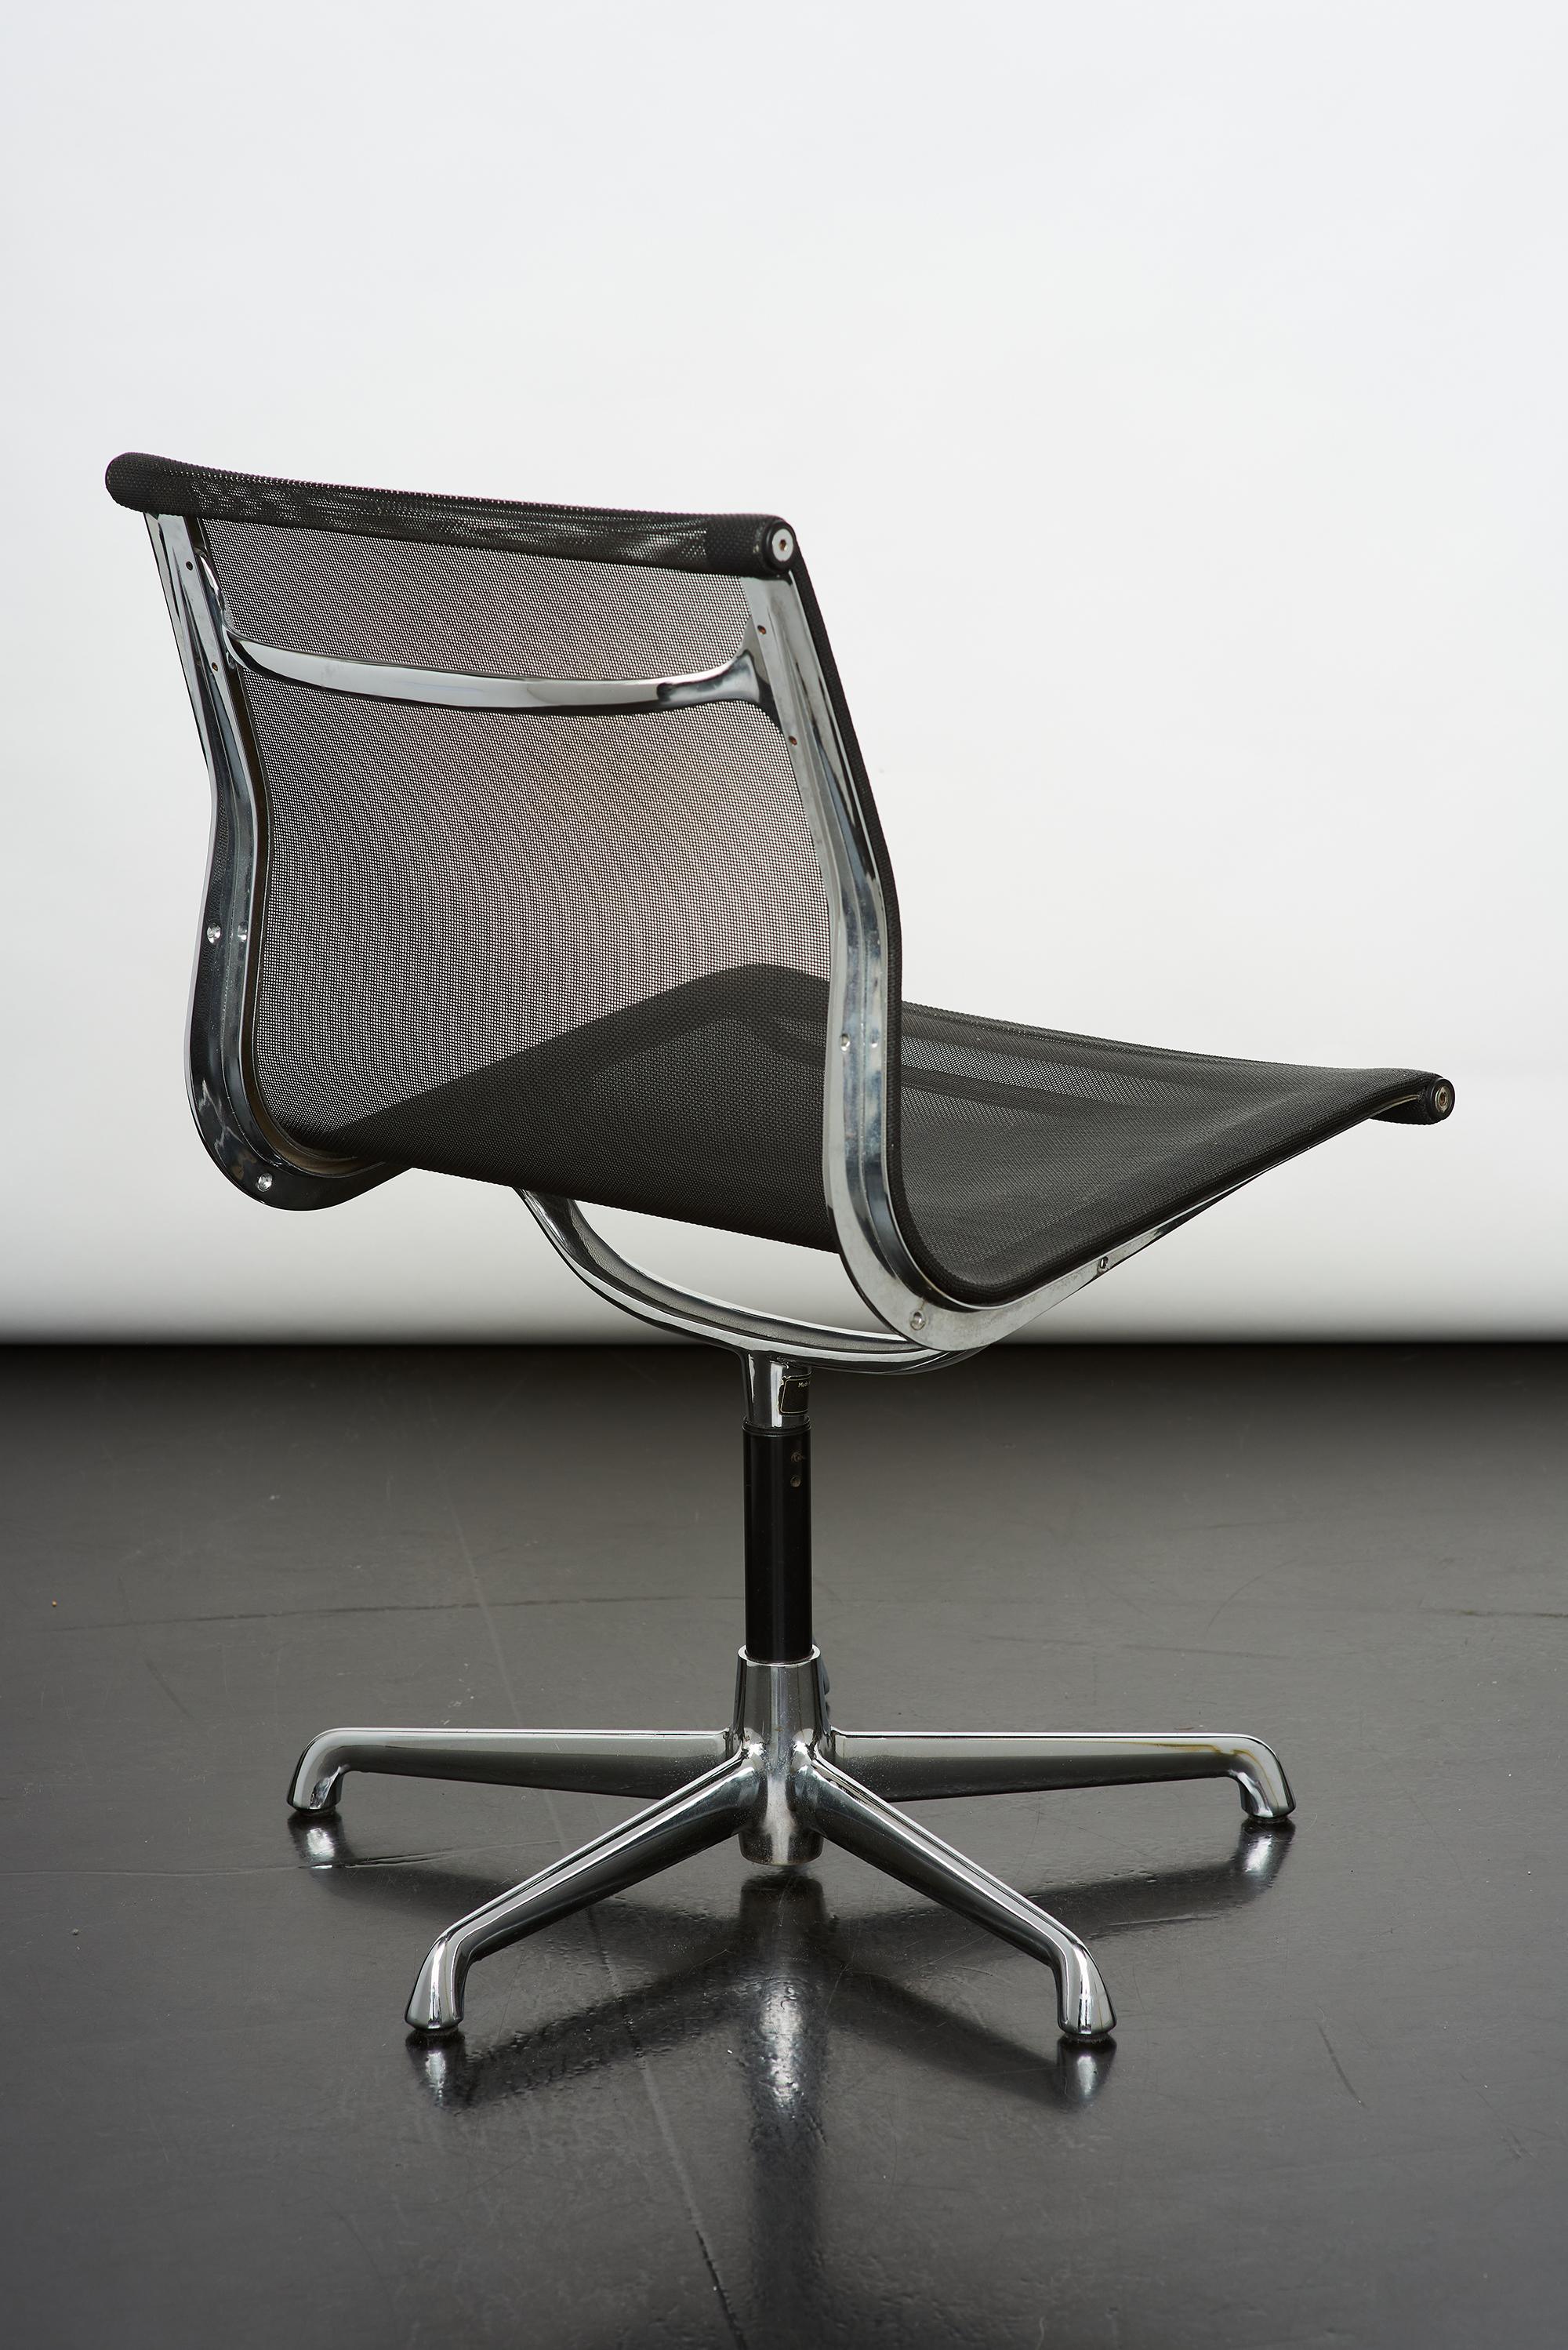 Mesh Eames EA105 swivel chair produced by ICF.
The chair is part of the famous Aluminum Group series, designed by Charles and Ray Eames starting in 1958.
Excellent condition.